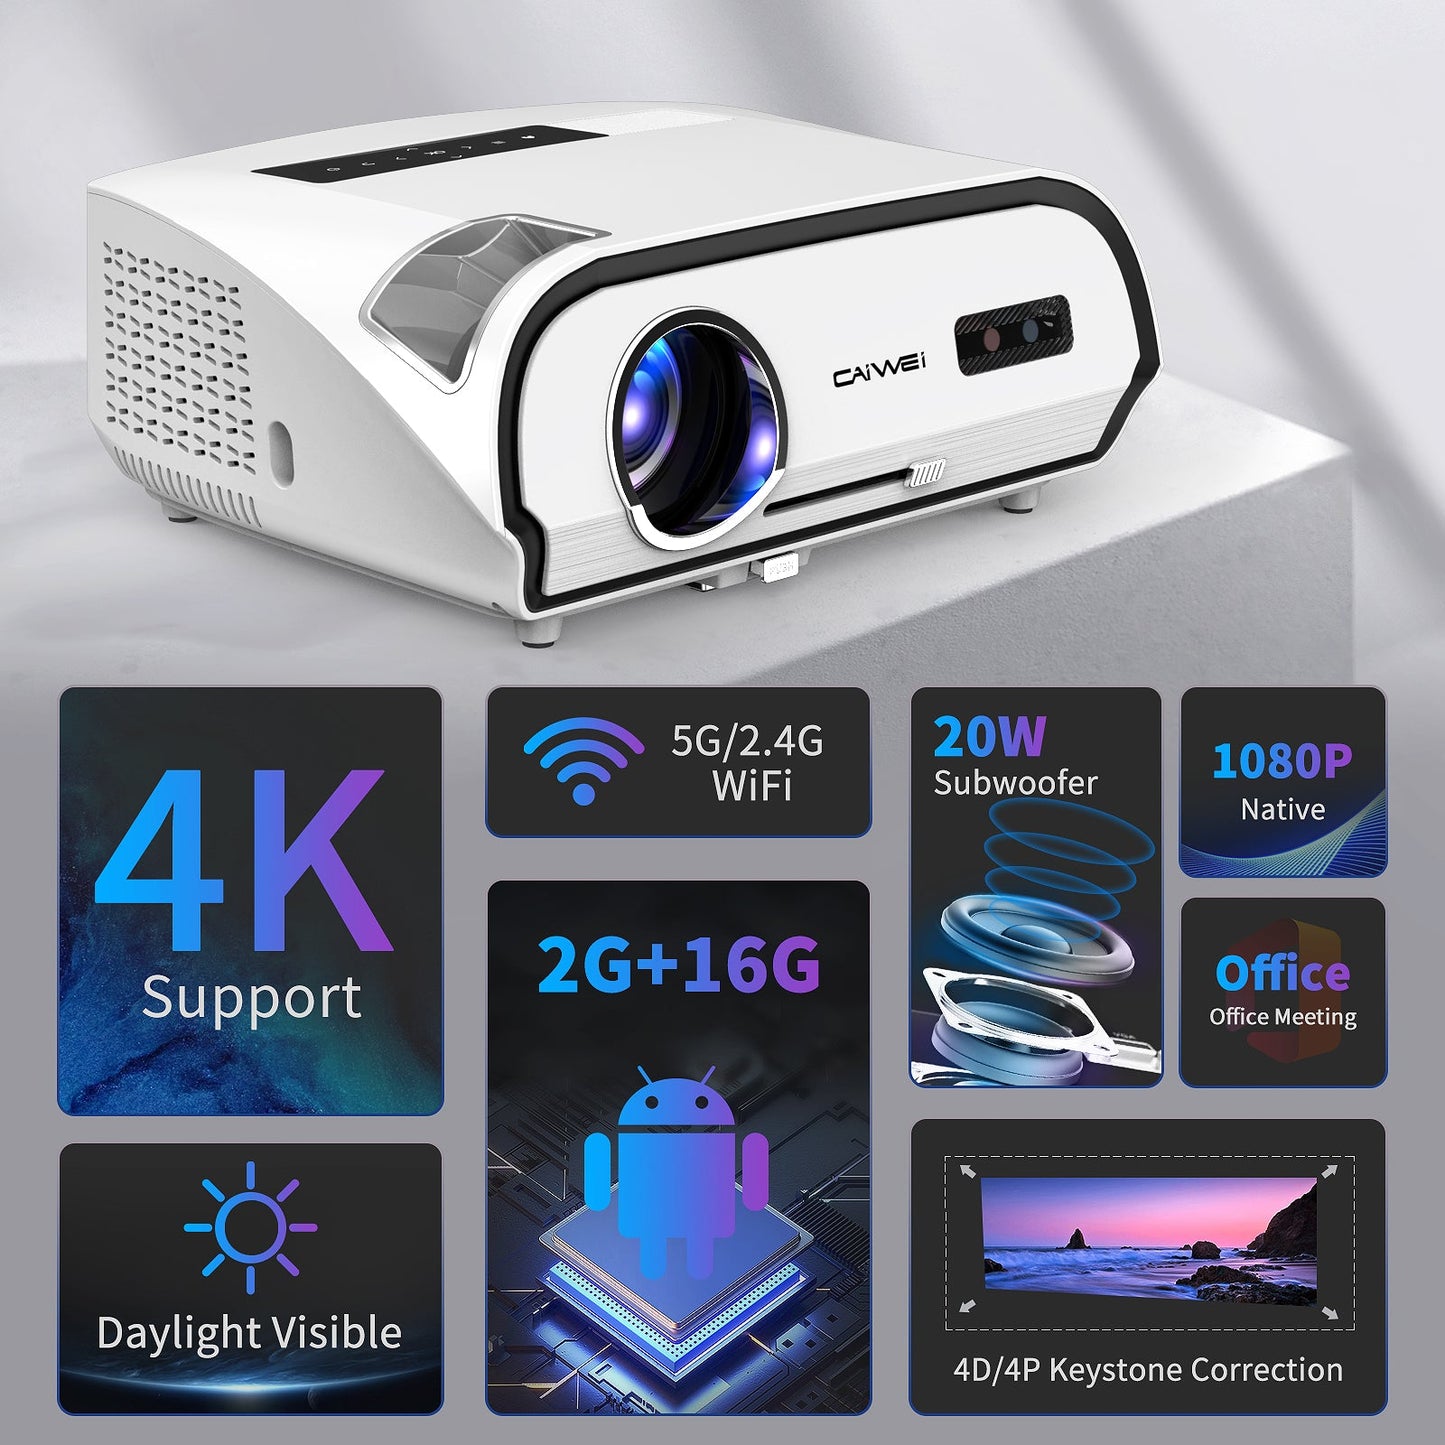 CAIWEI 4K Projector with 5G Wifi and Bluetooth, 1100 ANSI/14300 Lumen Outdoor Movie Projector for 300 Inch, Native 1080P Projector with 4D Keystone Correction, Compatible TV Stick,iOS,Android,Windows